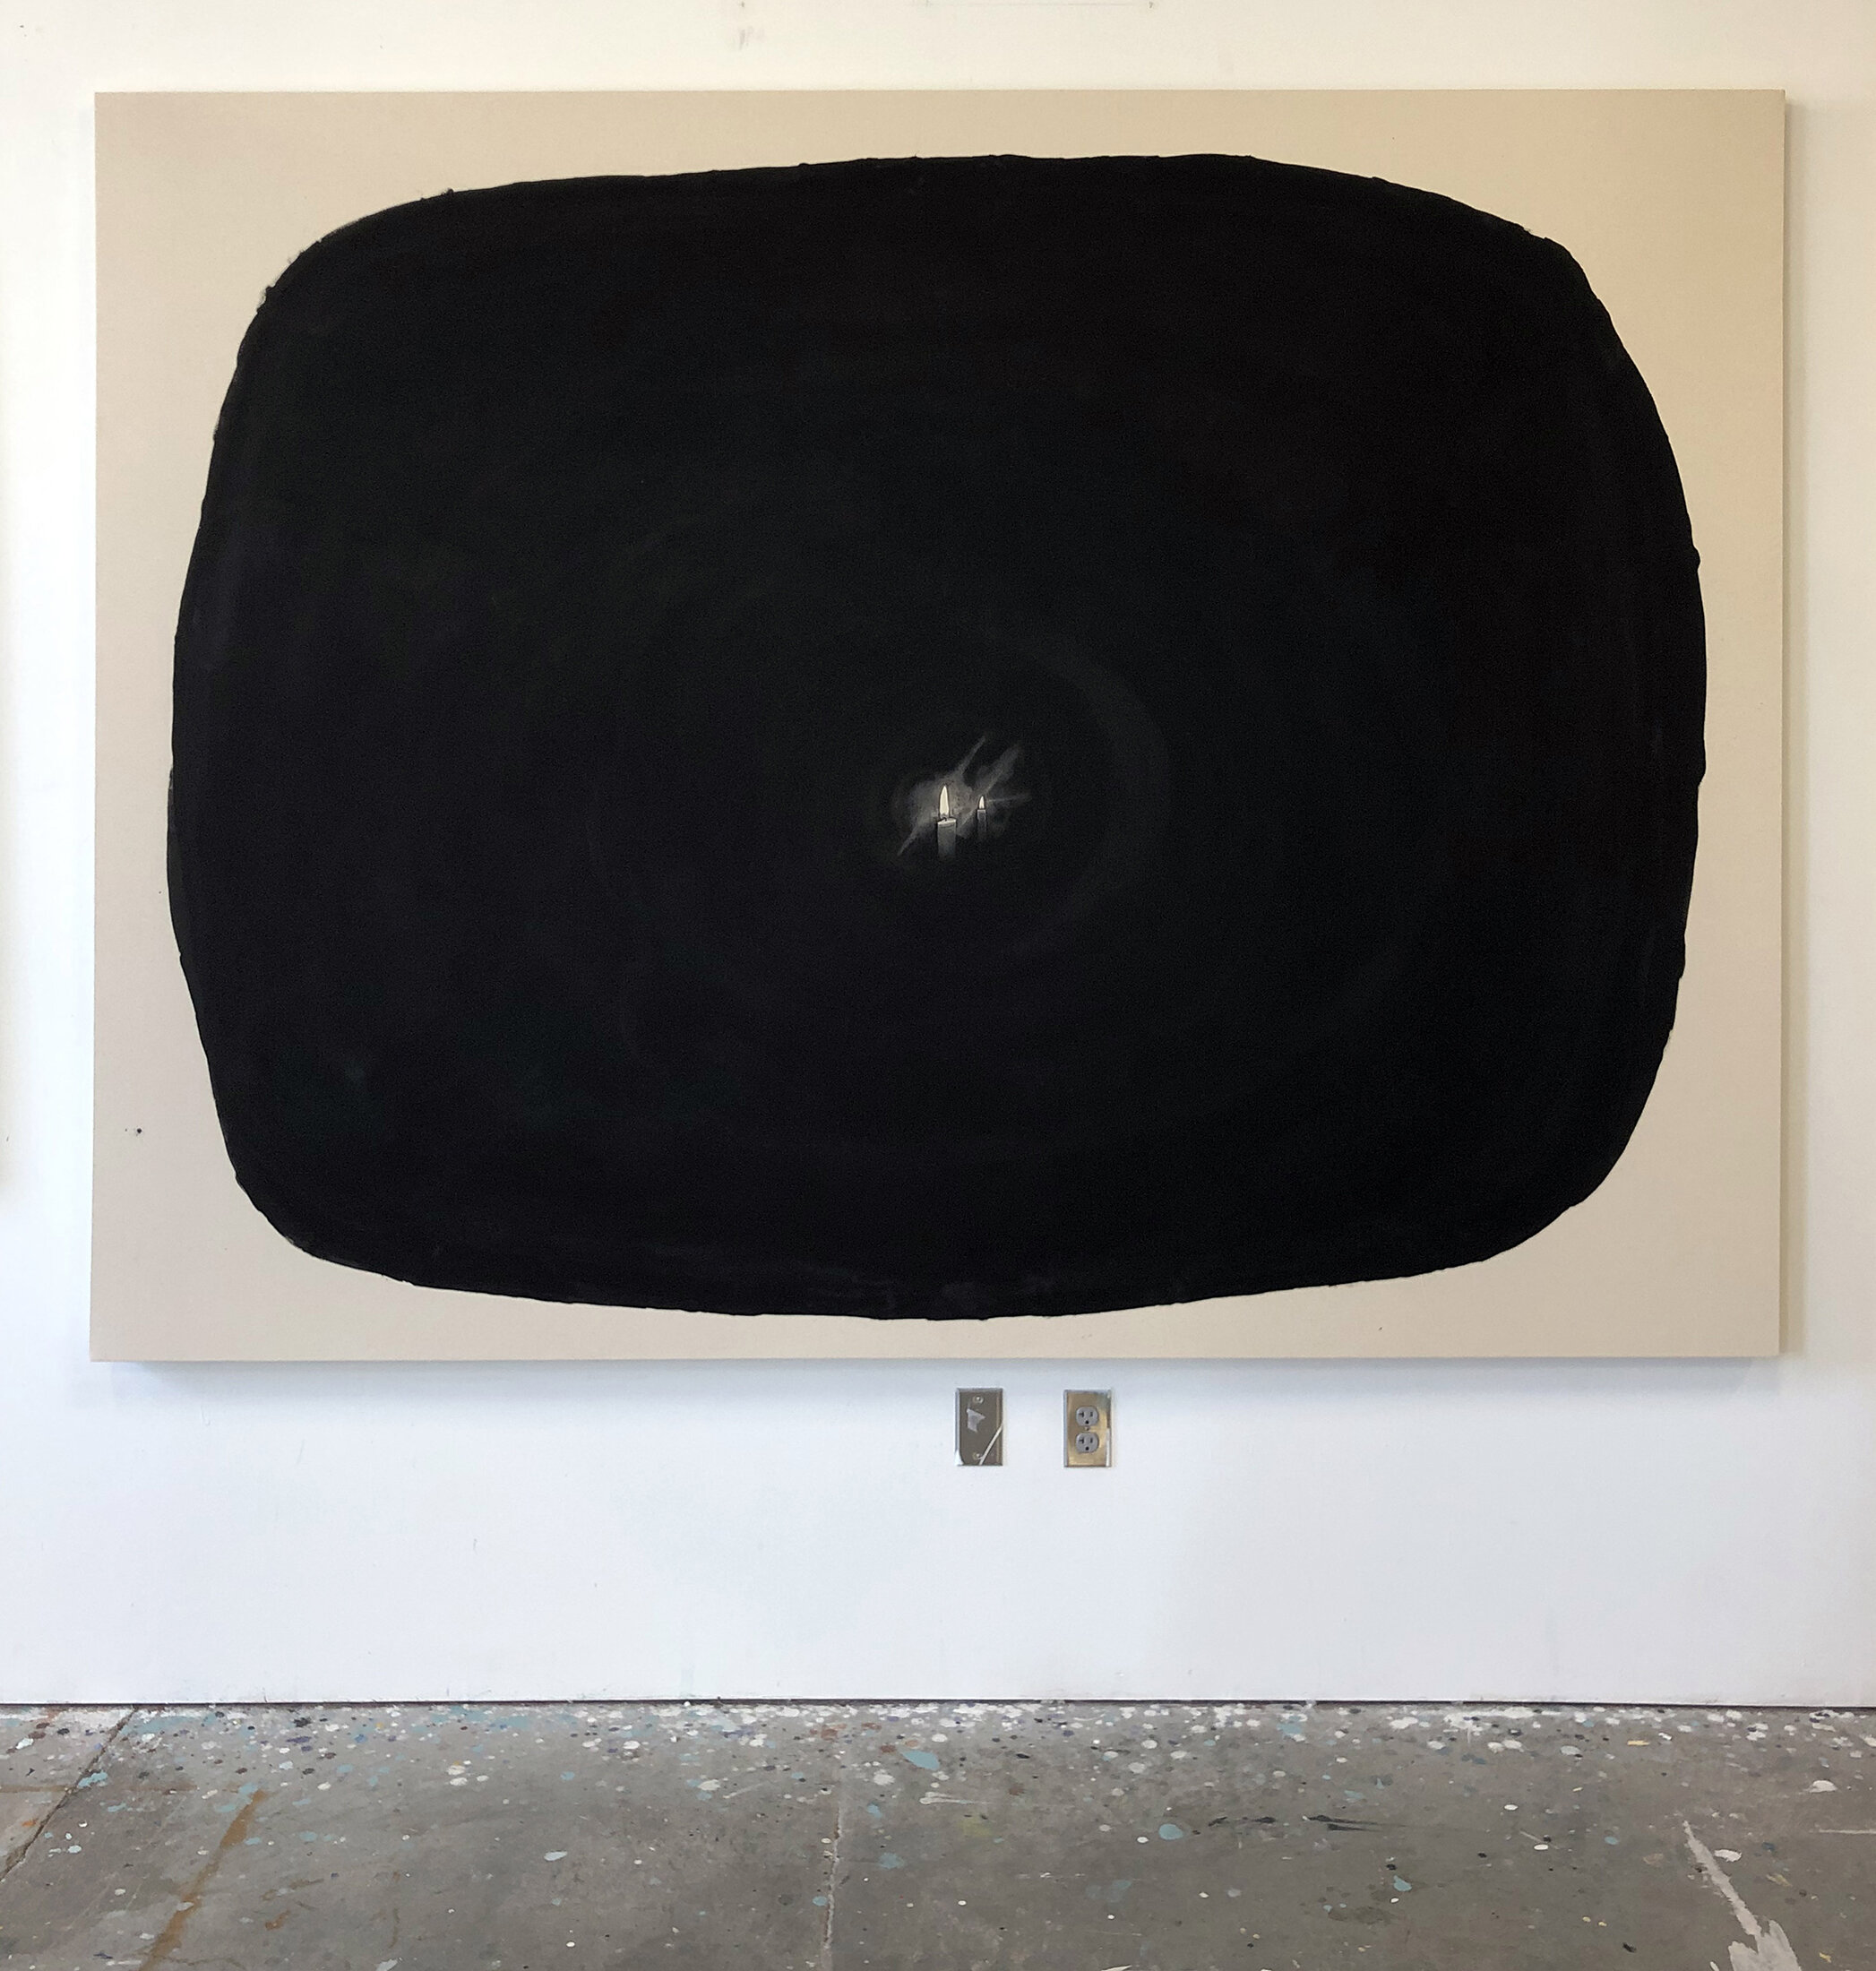   Not Yet Titled (Candles) , 2020 Black gesso on canvas 72 x 96 inches (1.83m x 2.43m) 